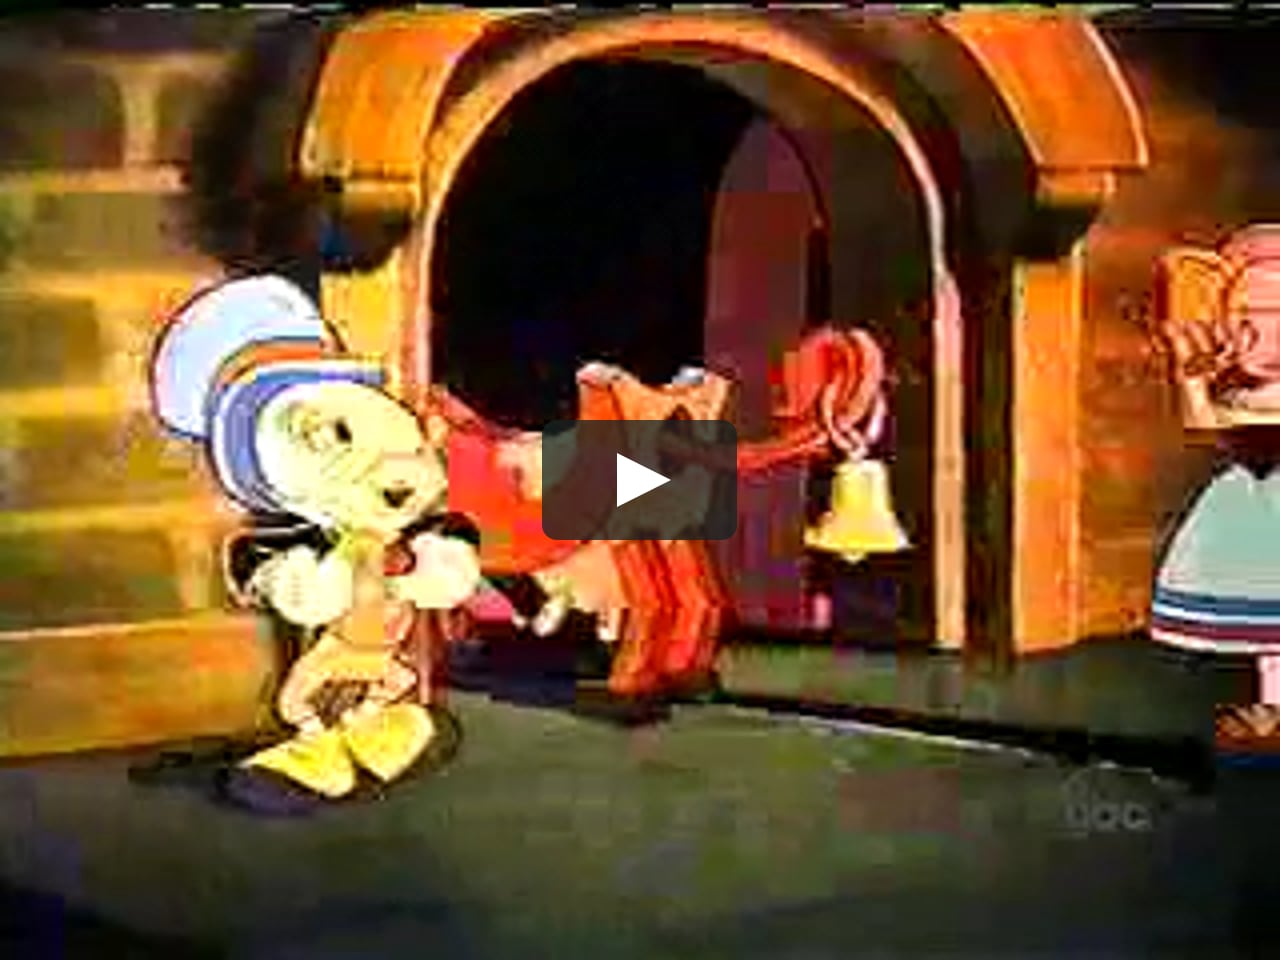 Pinocchio and Jiminy Cricket - Always Let Your Conscience Be Your Guide!